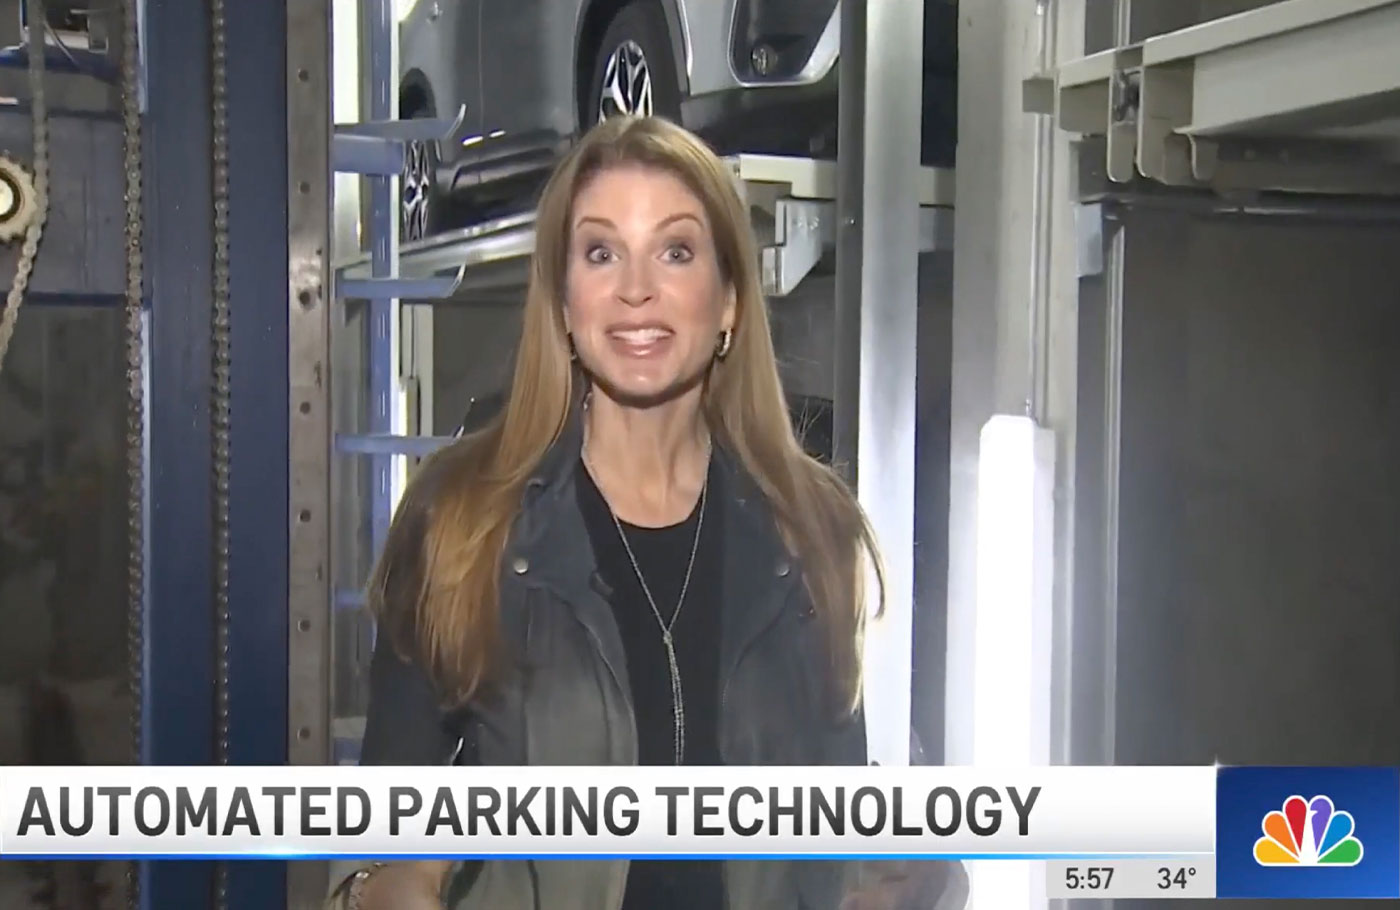 The Future of Car Parking in the City With Automated Technology